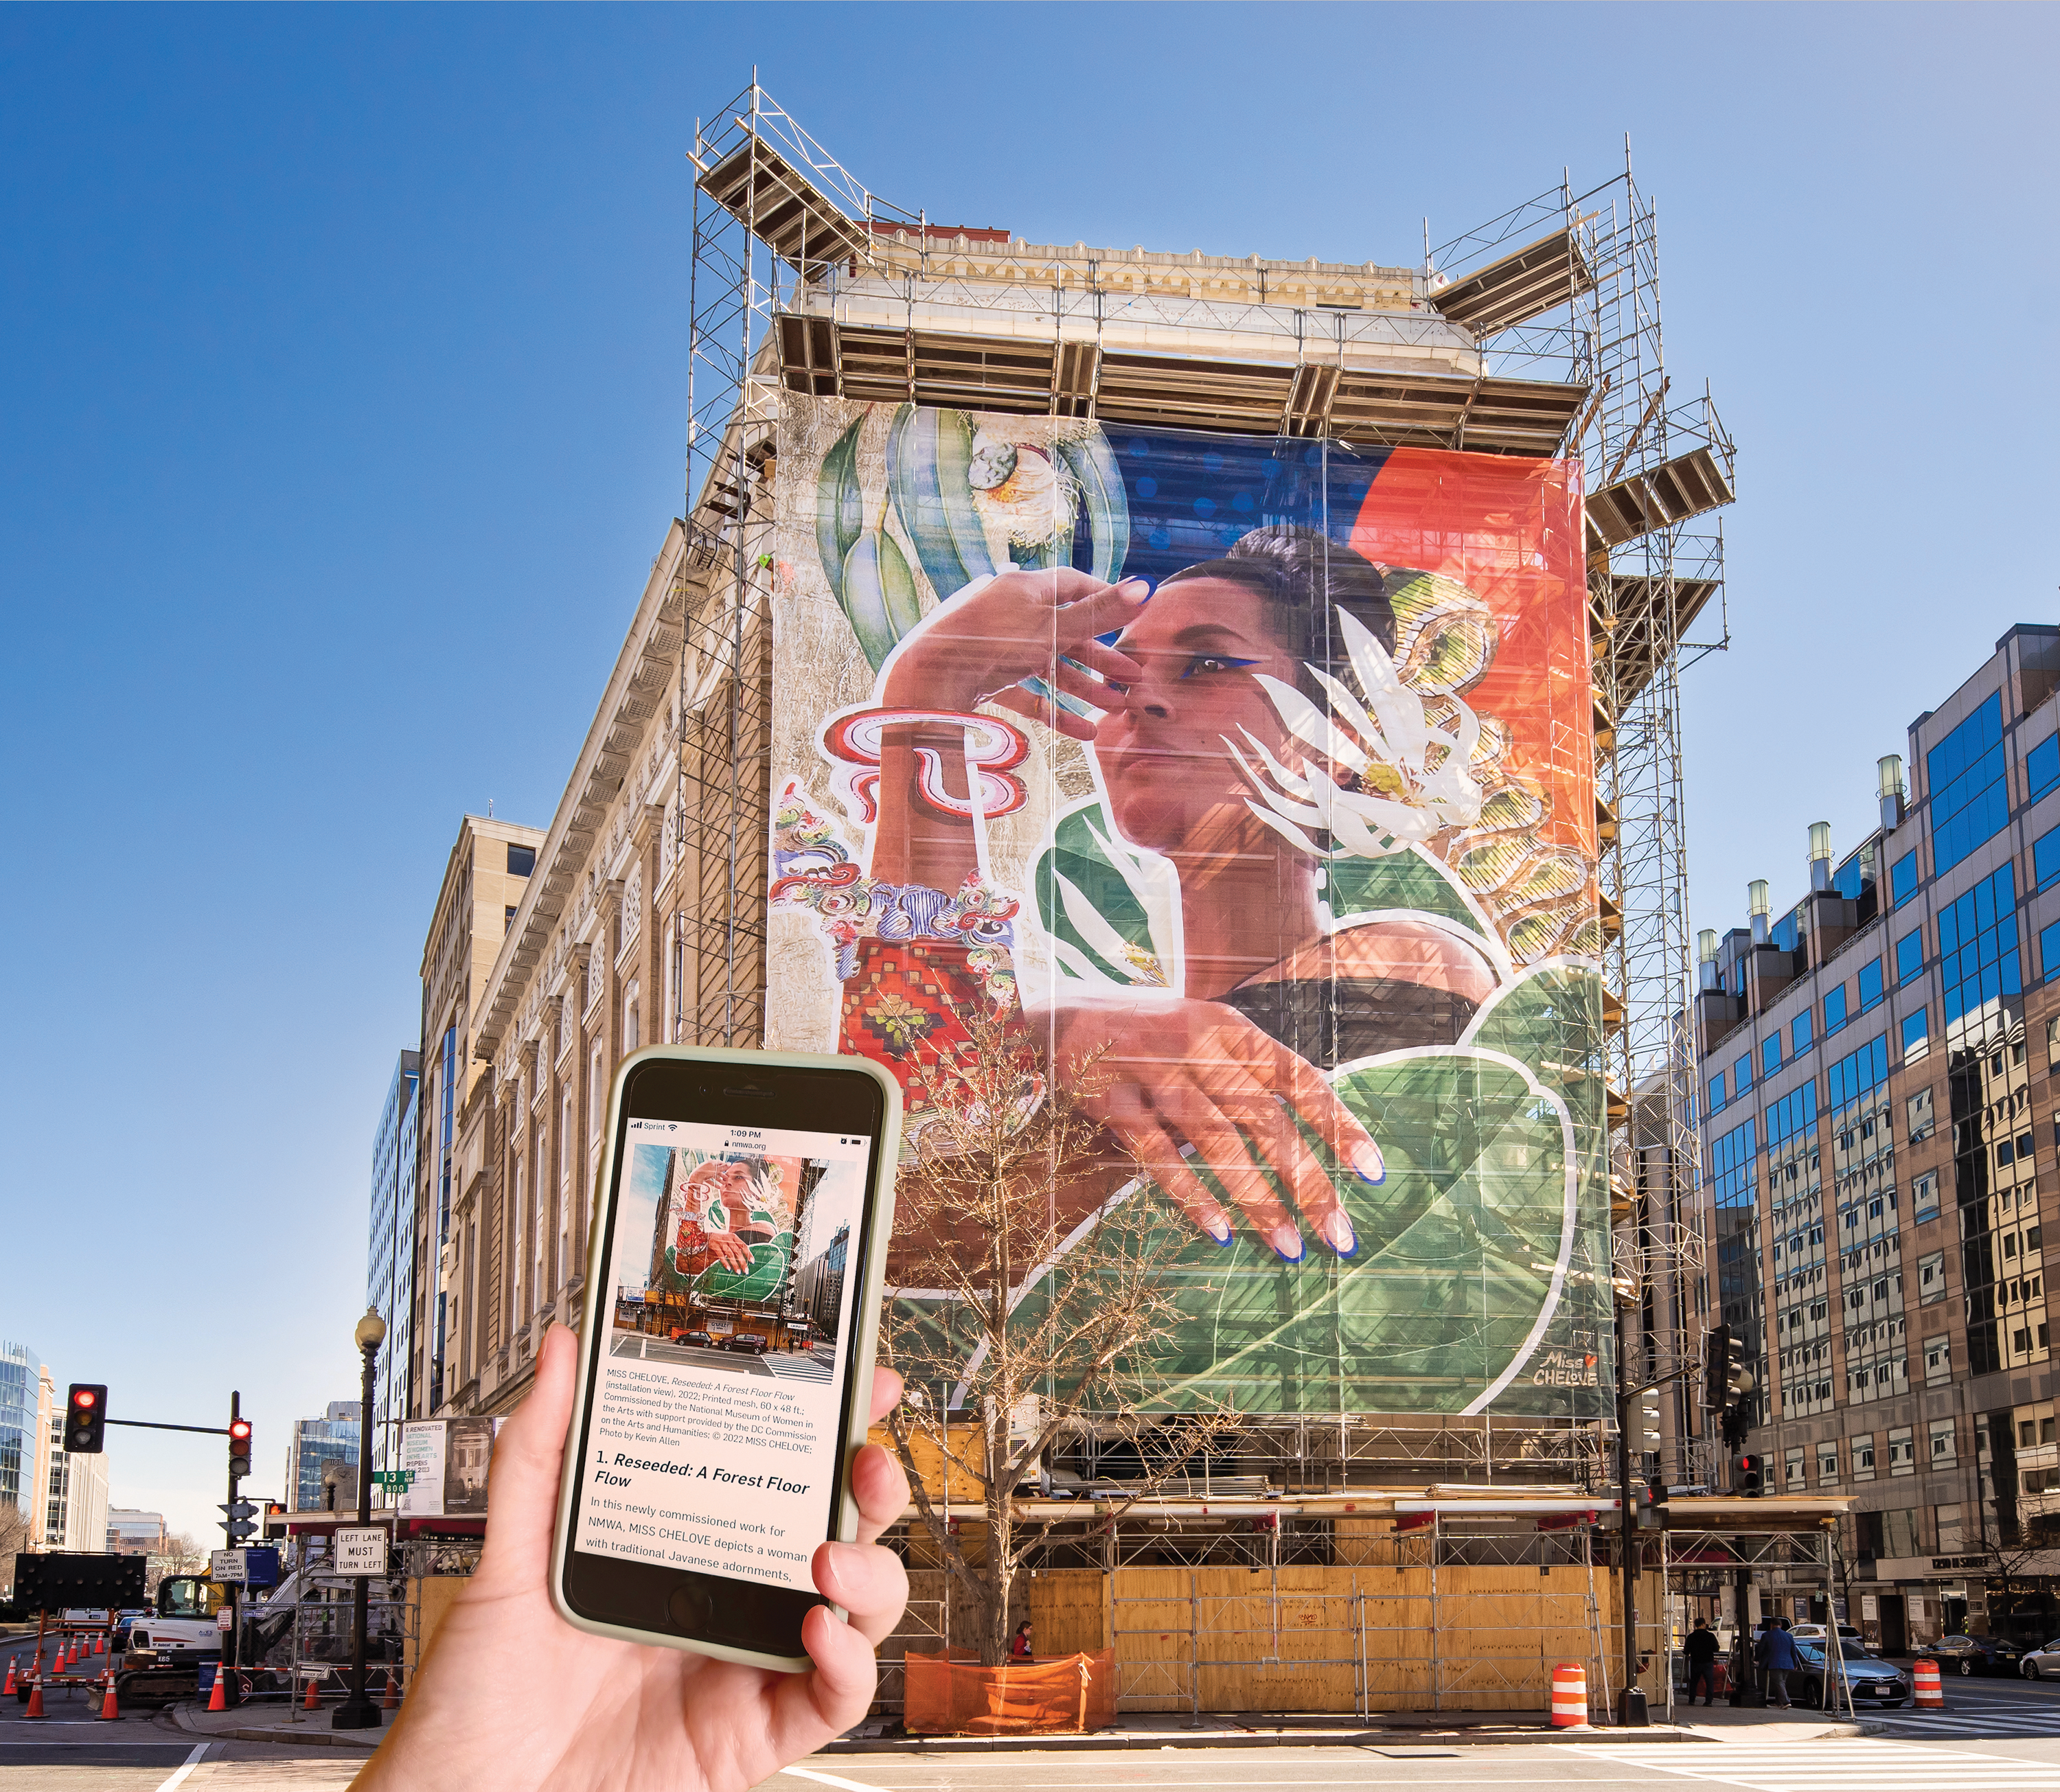 A light-skinned hand holds a mobile phone towards a four-story mural installed on the façade of the National Museum of Women in the Arts. The mural shows the upper half of a woman with a medium-light skin tone surrounded by various colorful plants and symbols. The phone’s screen faces the viewer and contains a small image of the mural and text.